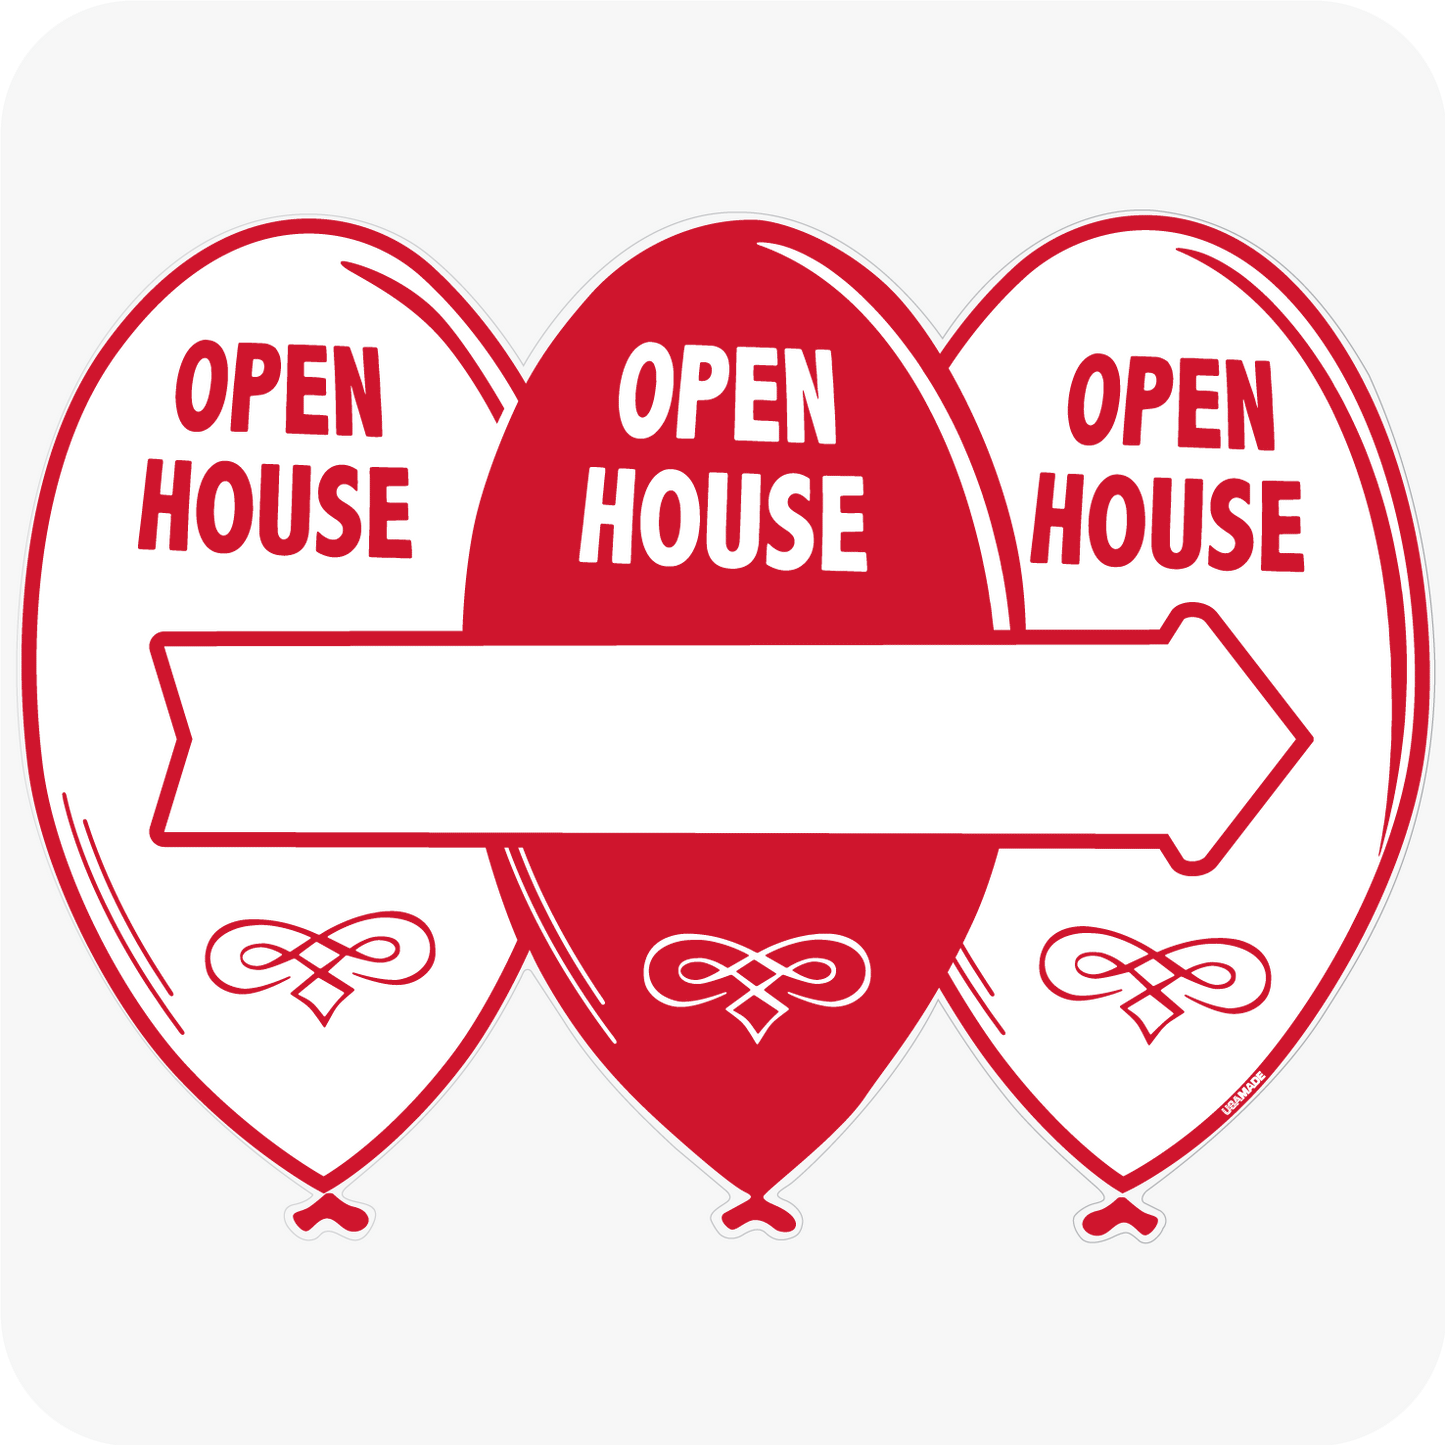 Open House Balloon Sign with Arrow - Red